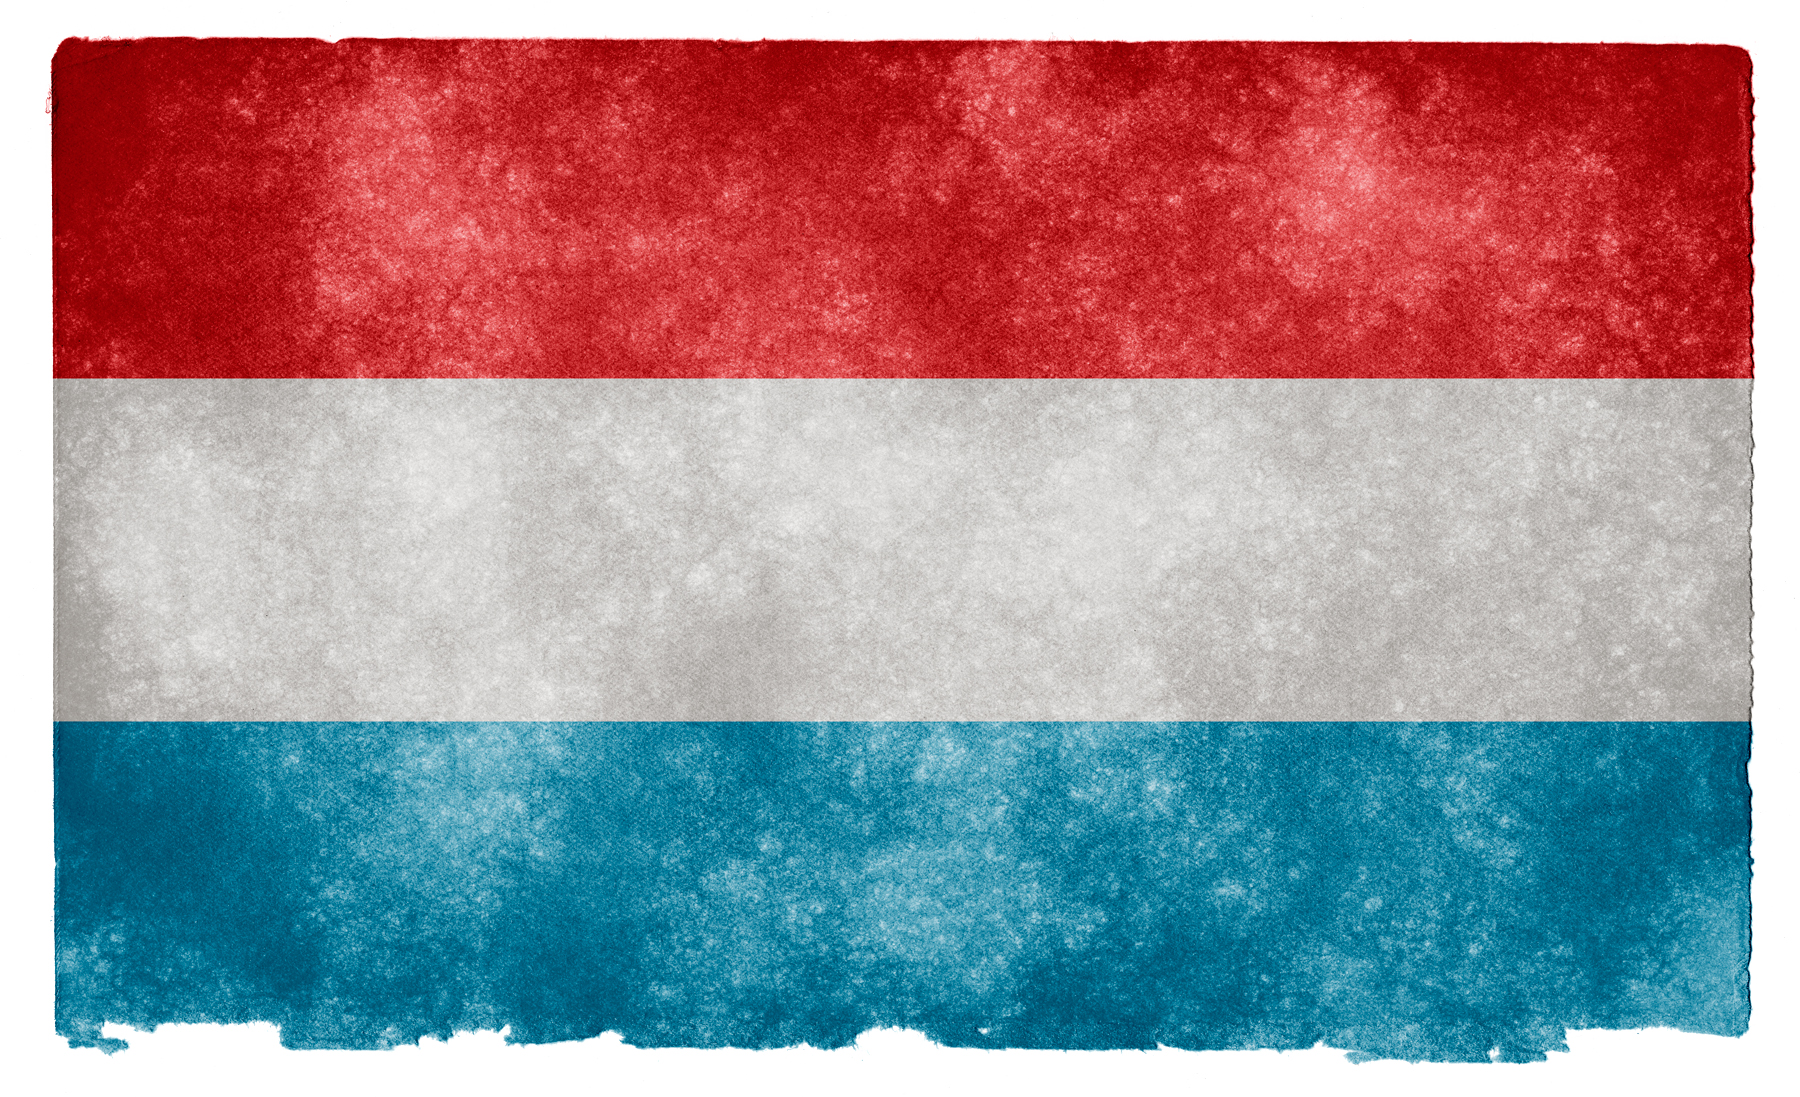 Luxembourg grunge flag photo